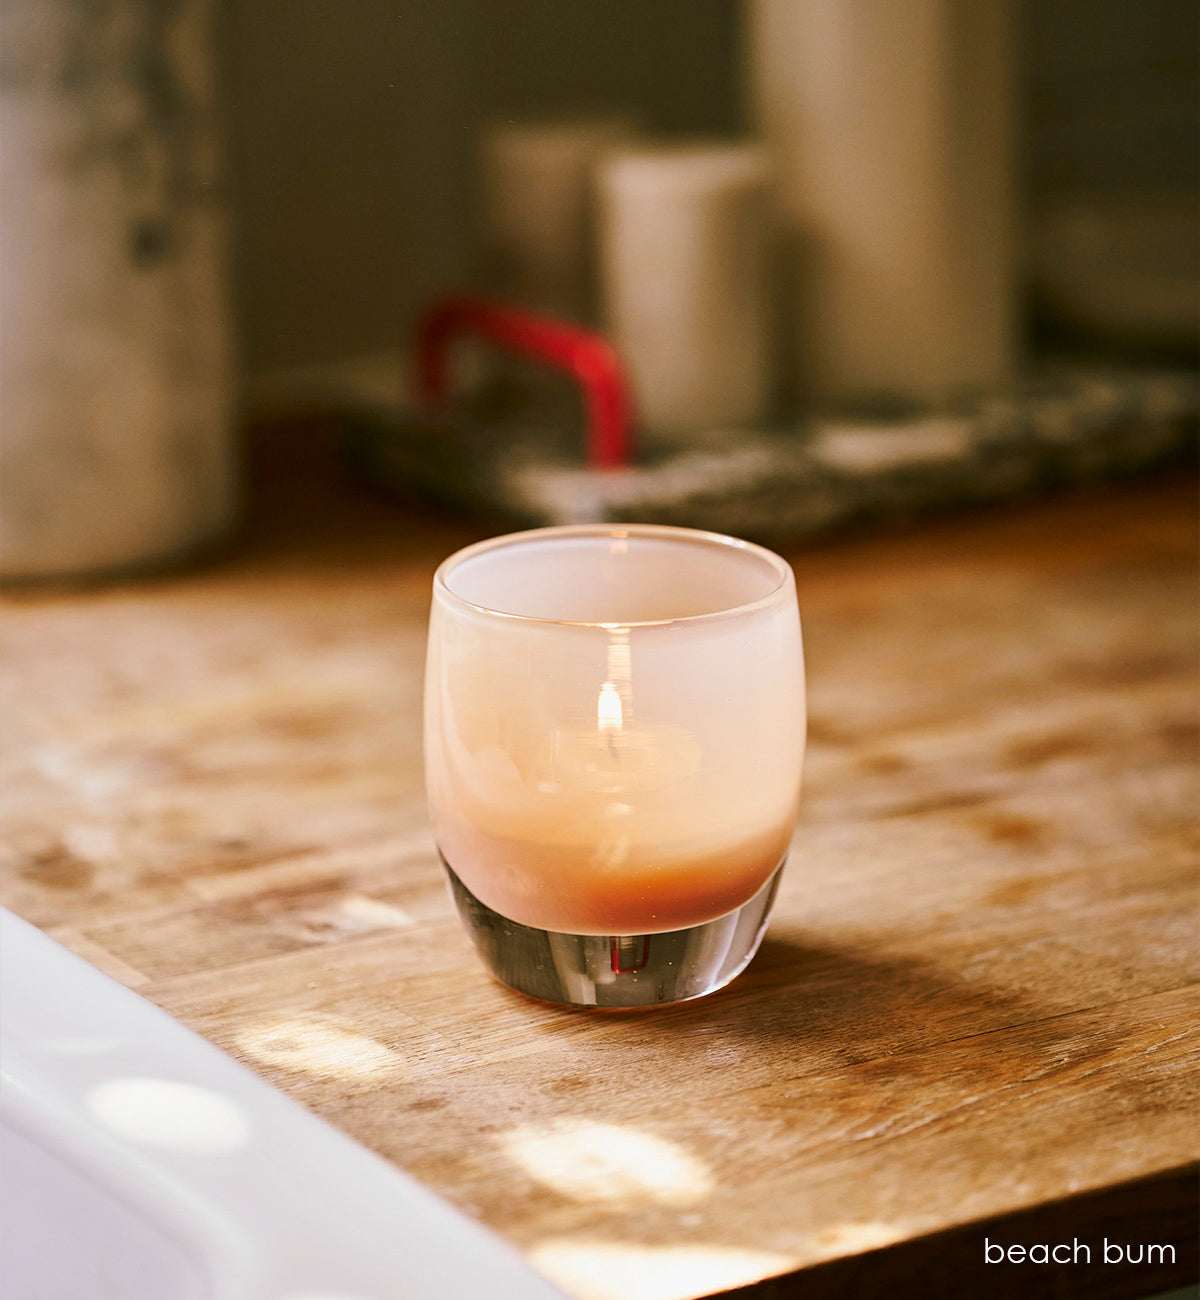 beach bum, tan hand-blown glass votive candle holder on a wood kitchen counter with kitchenware blurred in background.